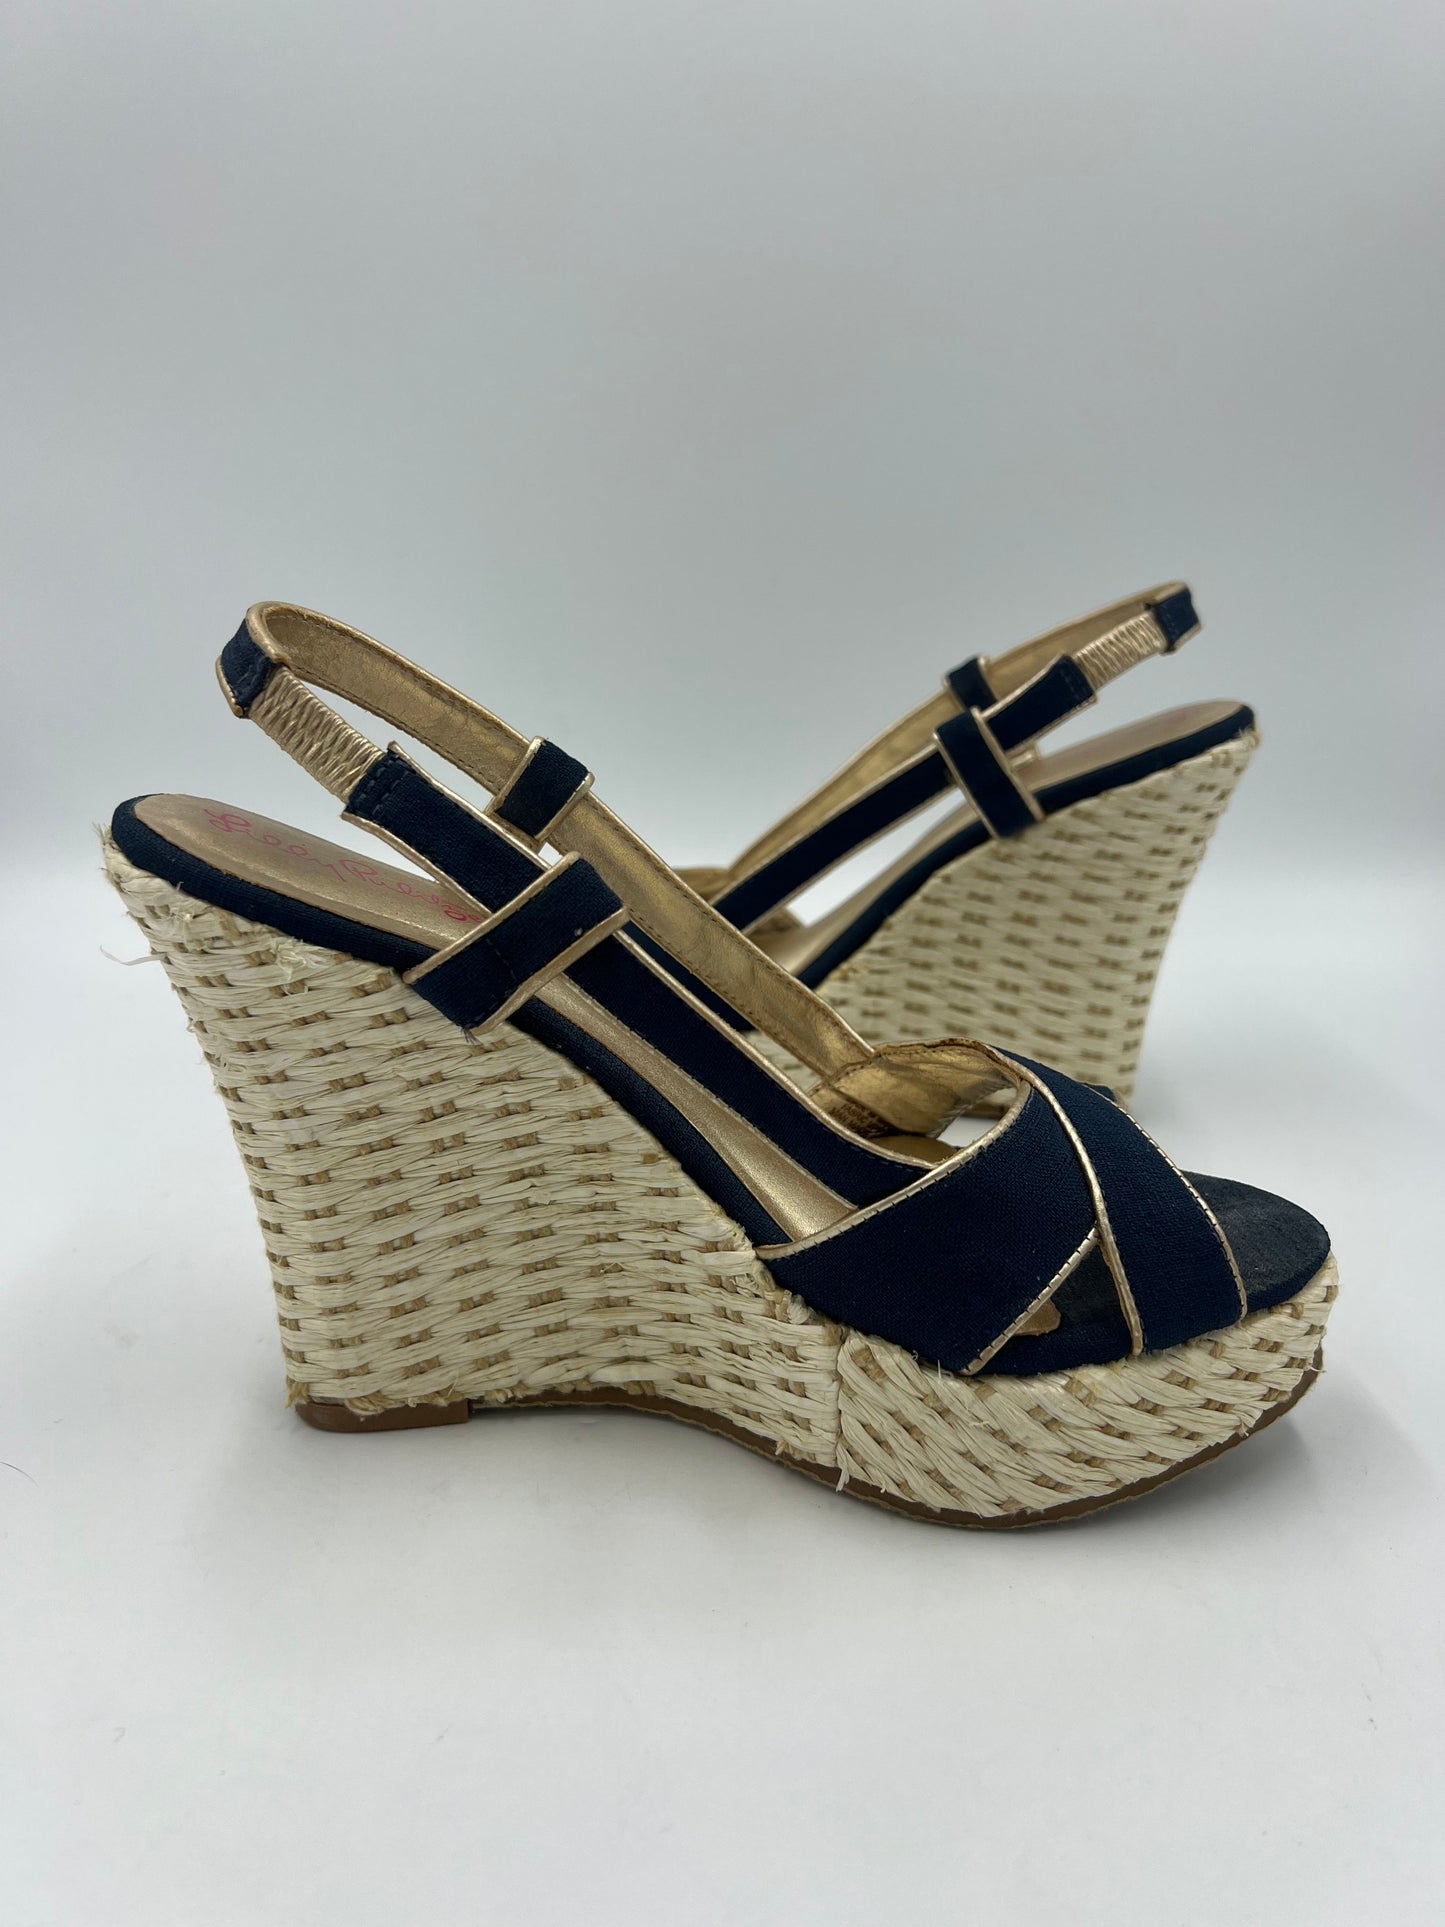 Lilly Pulitzer Espadrille Wedges  Size: 6.5